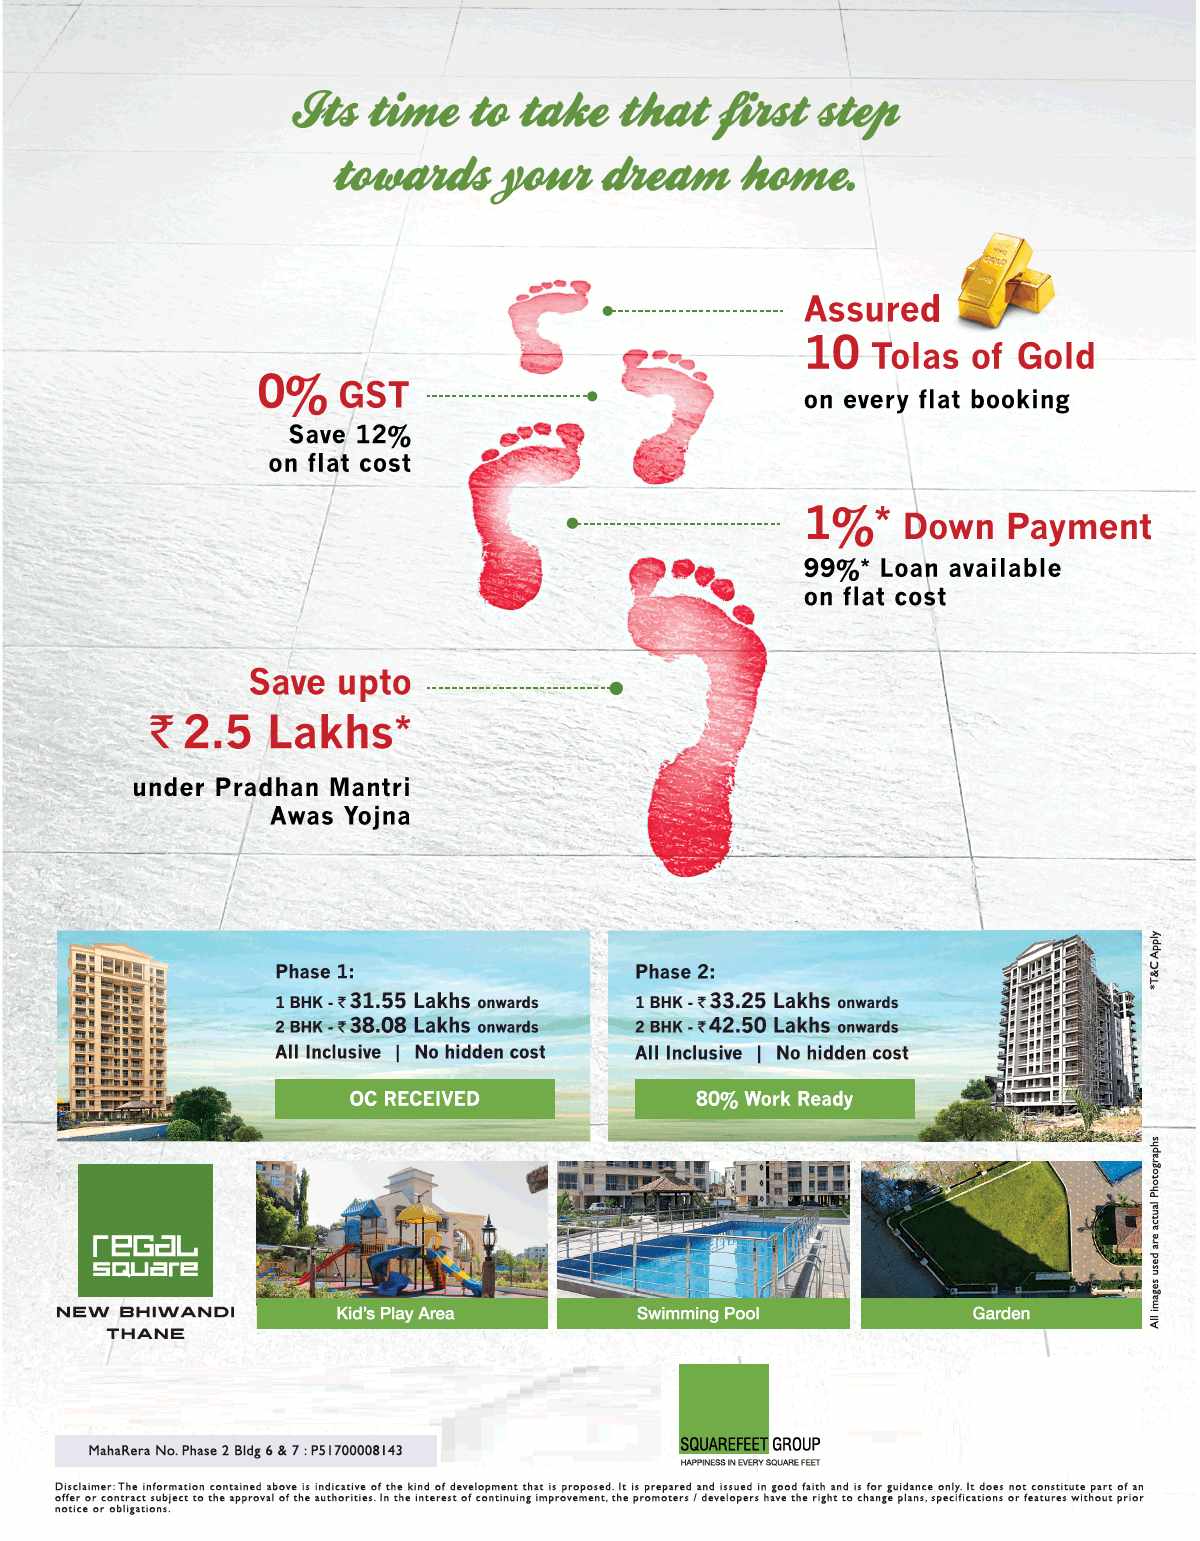 Take your first step towards your dream home at Squarefeet Regal Square in Mumbai